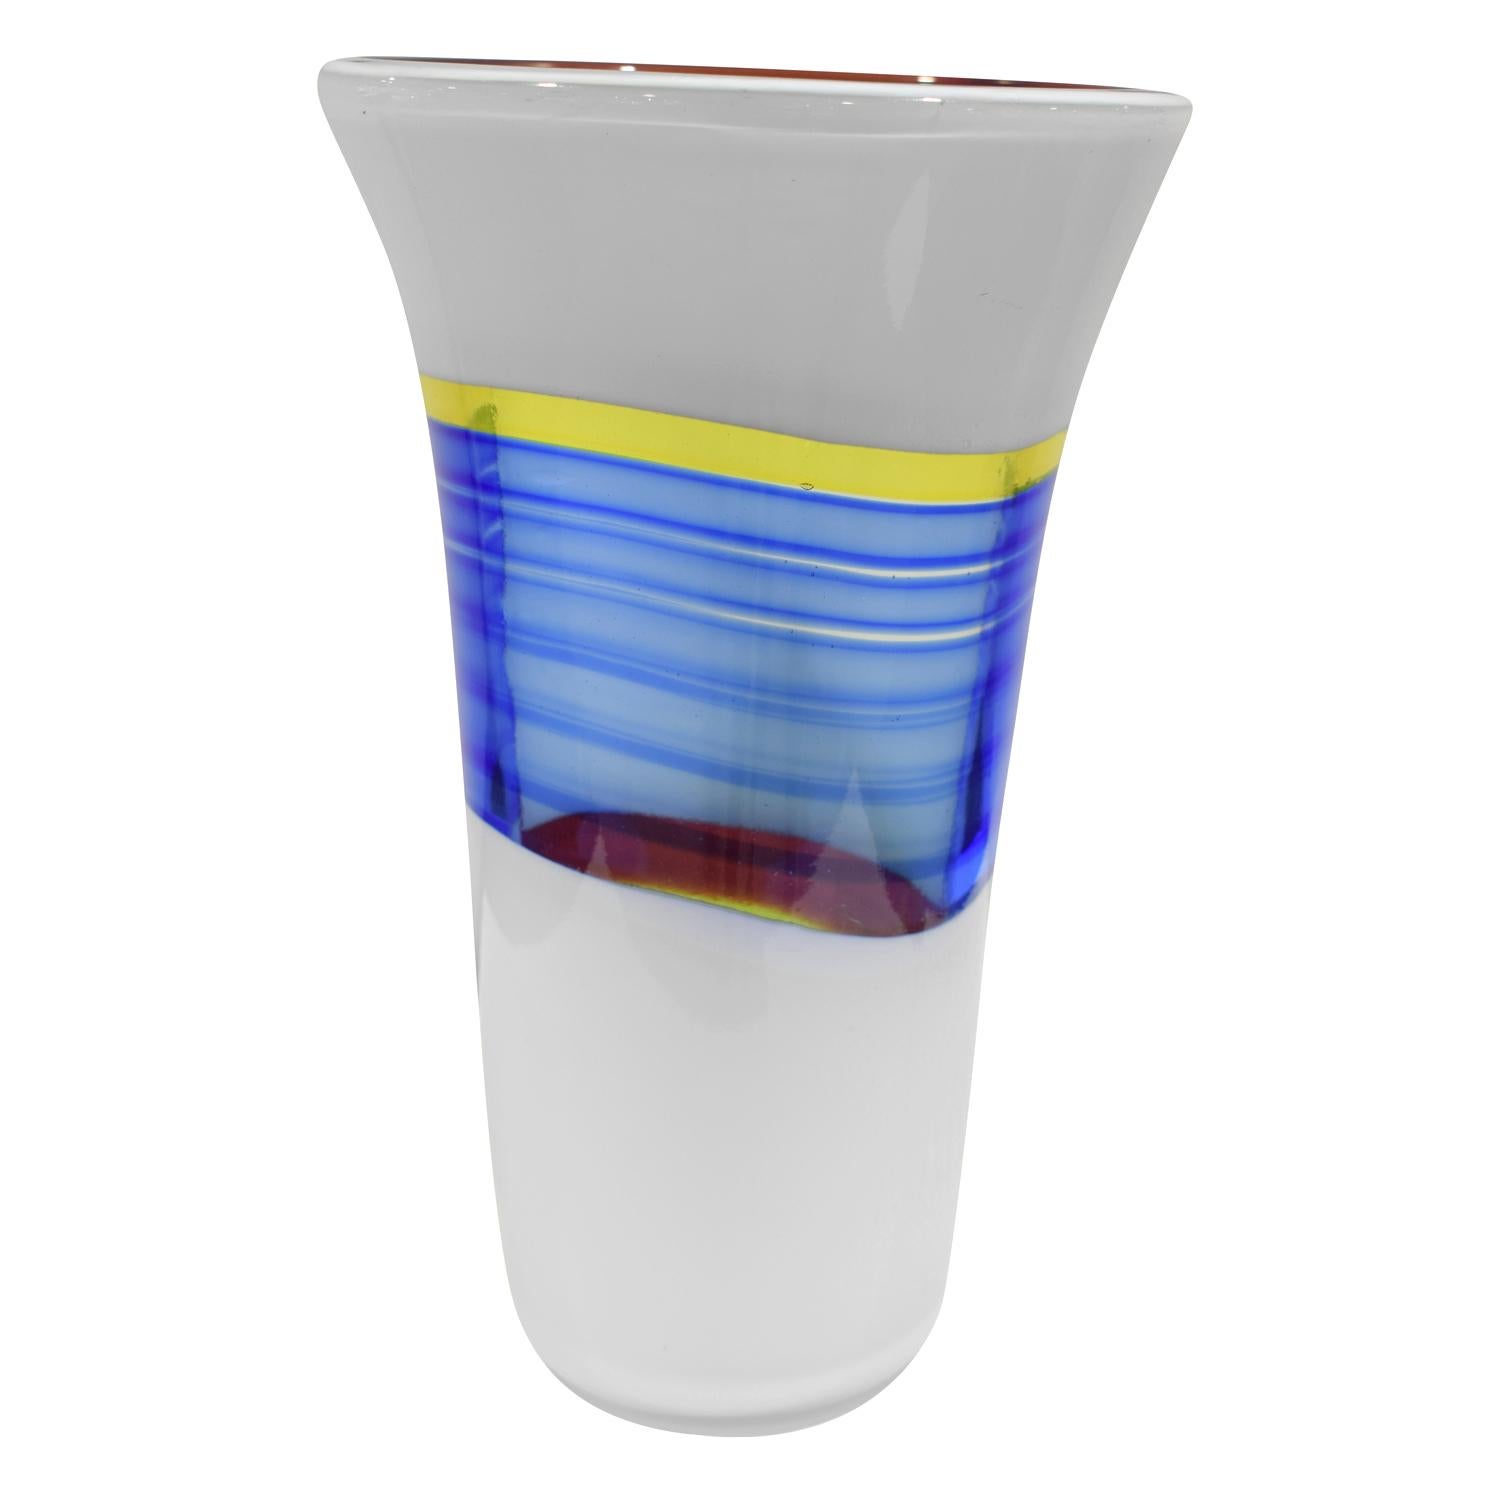 Rare and important hand blown glass “Bandiere Vase” model 13471 by Anzolo Fuga for Arte Vetraria Muranese (A.V.E.M.), Murano, Italy, 1955-1956. Etched on bottom “COL Luciano Ferro 1952”. Luciano Ferro was Fuga’s primary glass blower who executed